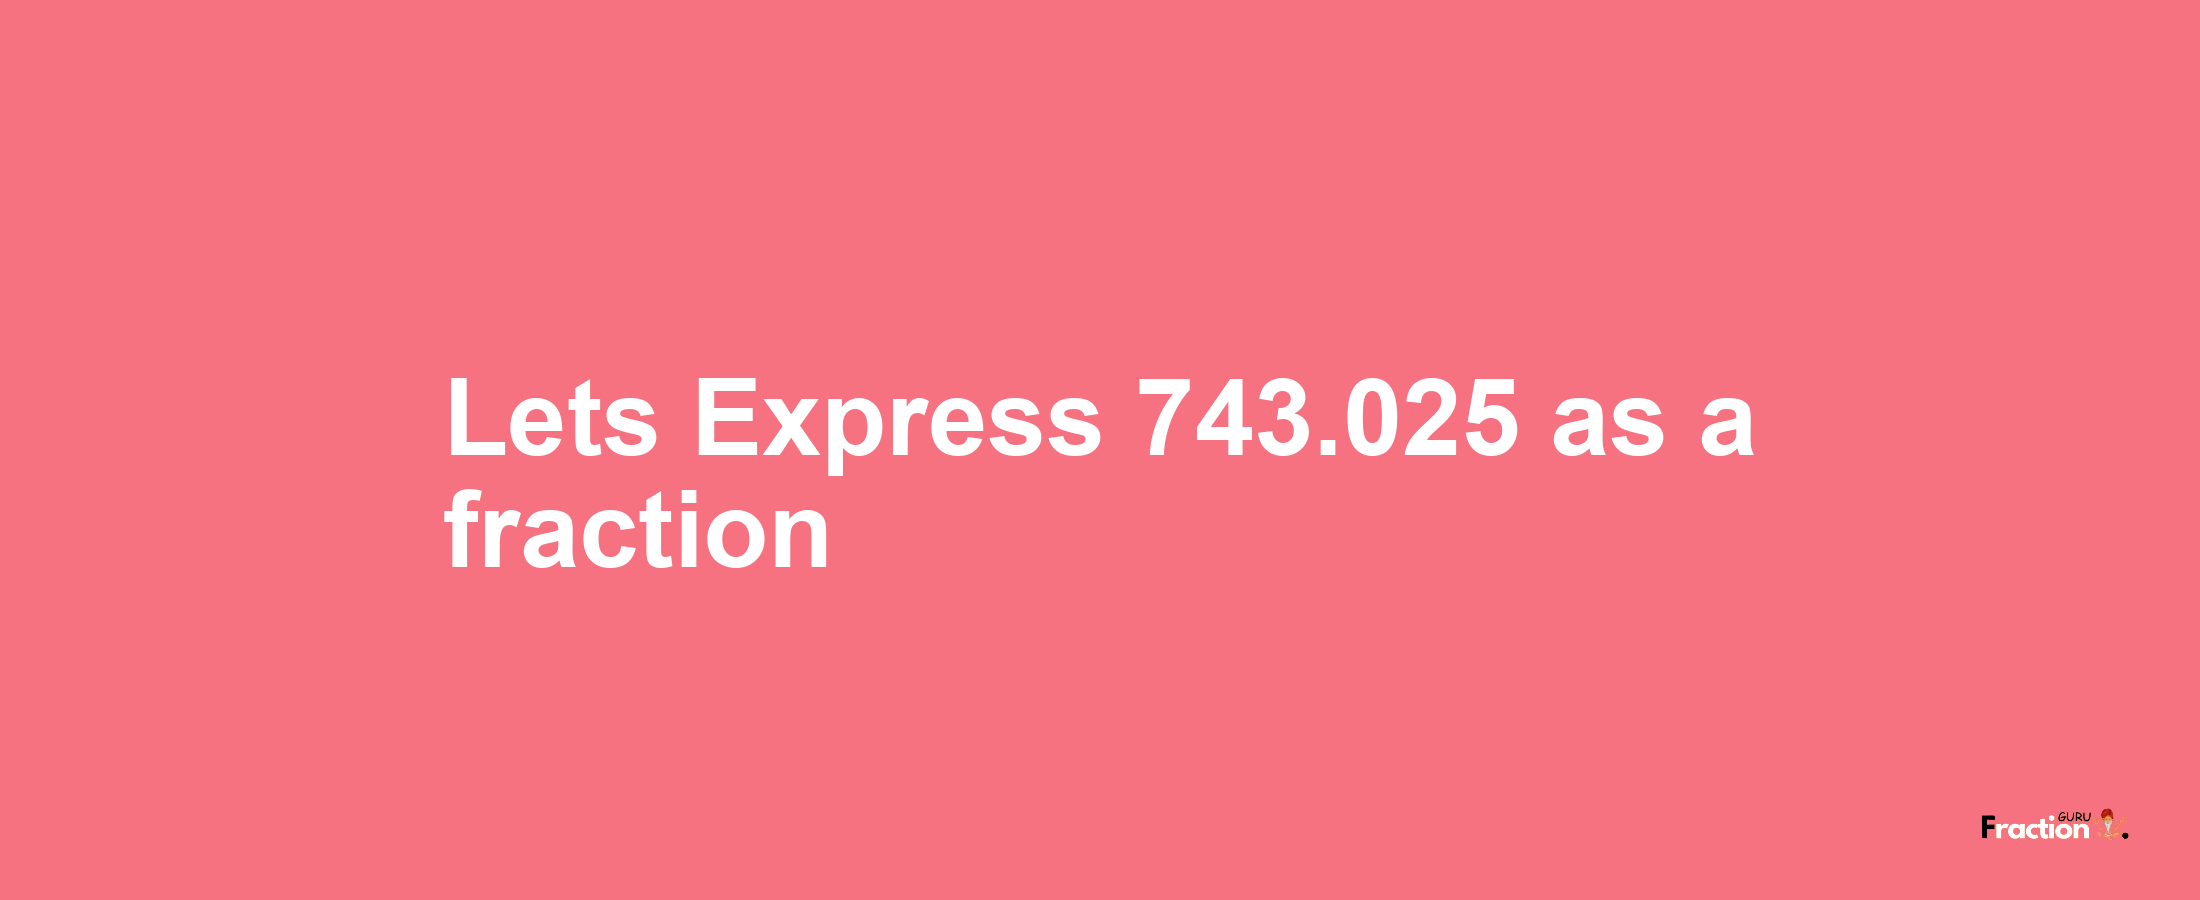 Lets Express 743.025 as afraction